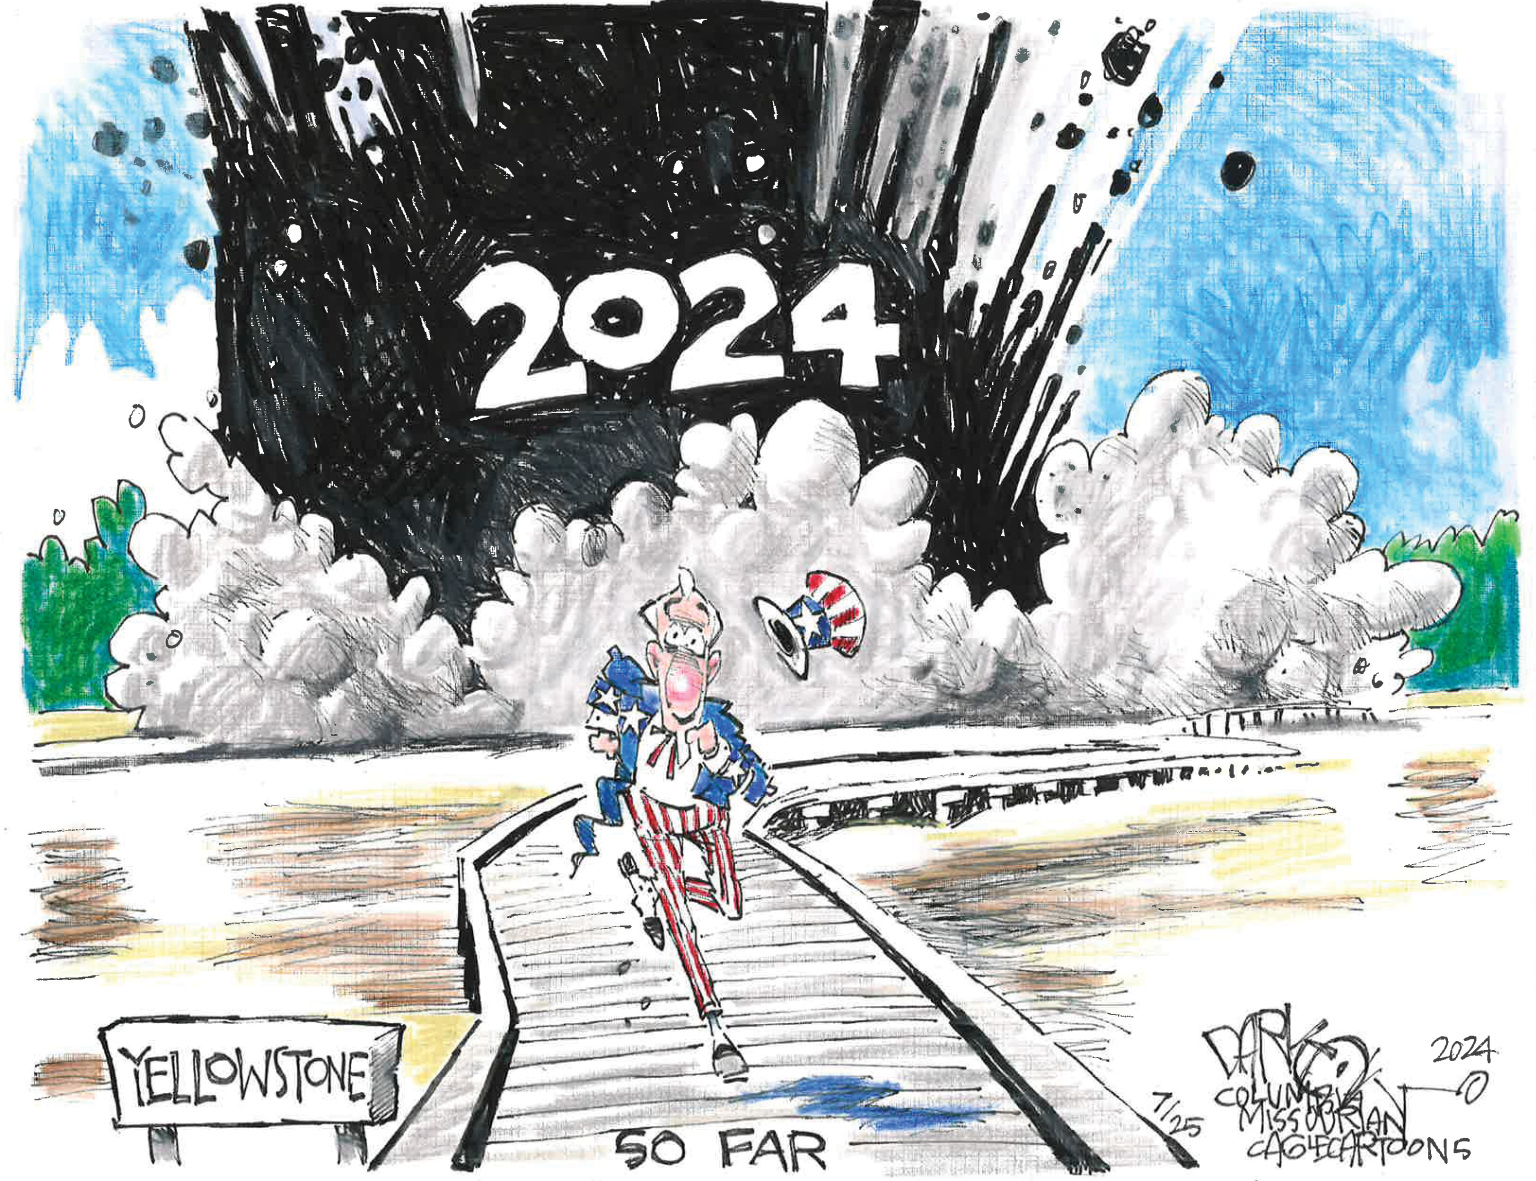  Today's political cartoons - July 28, 2024 